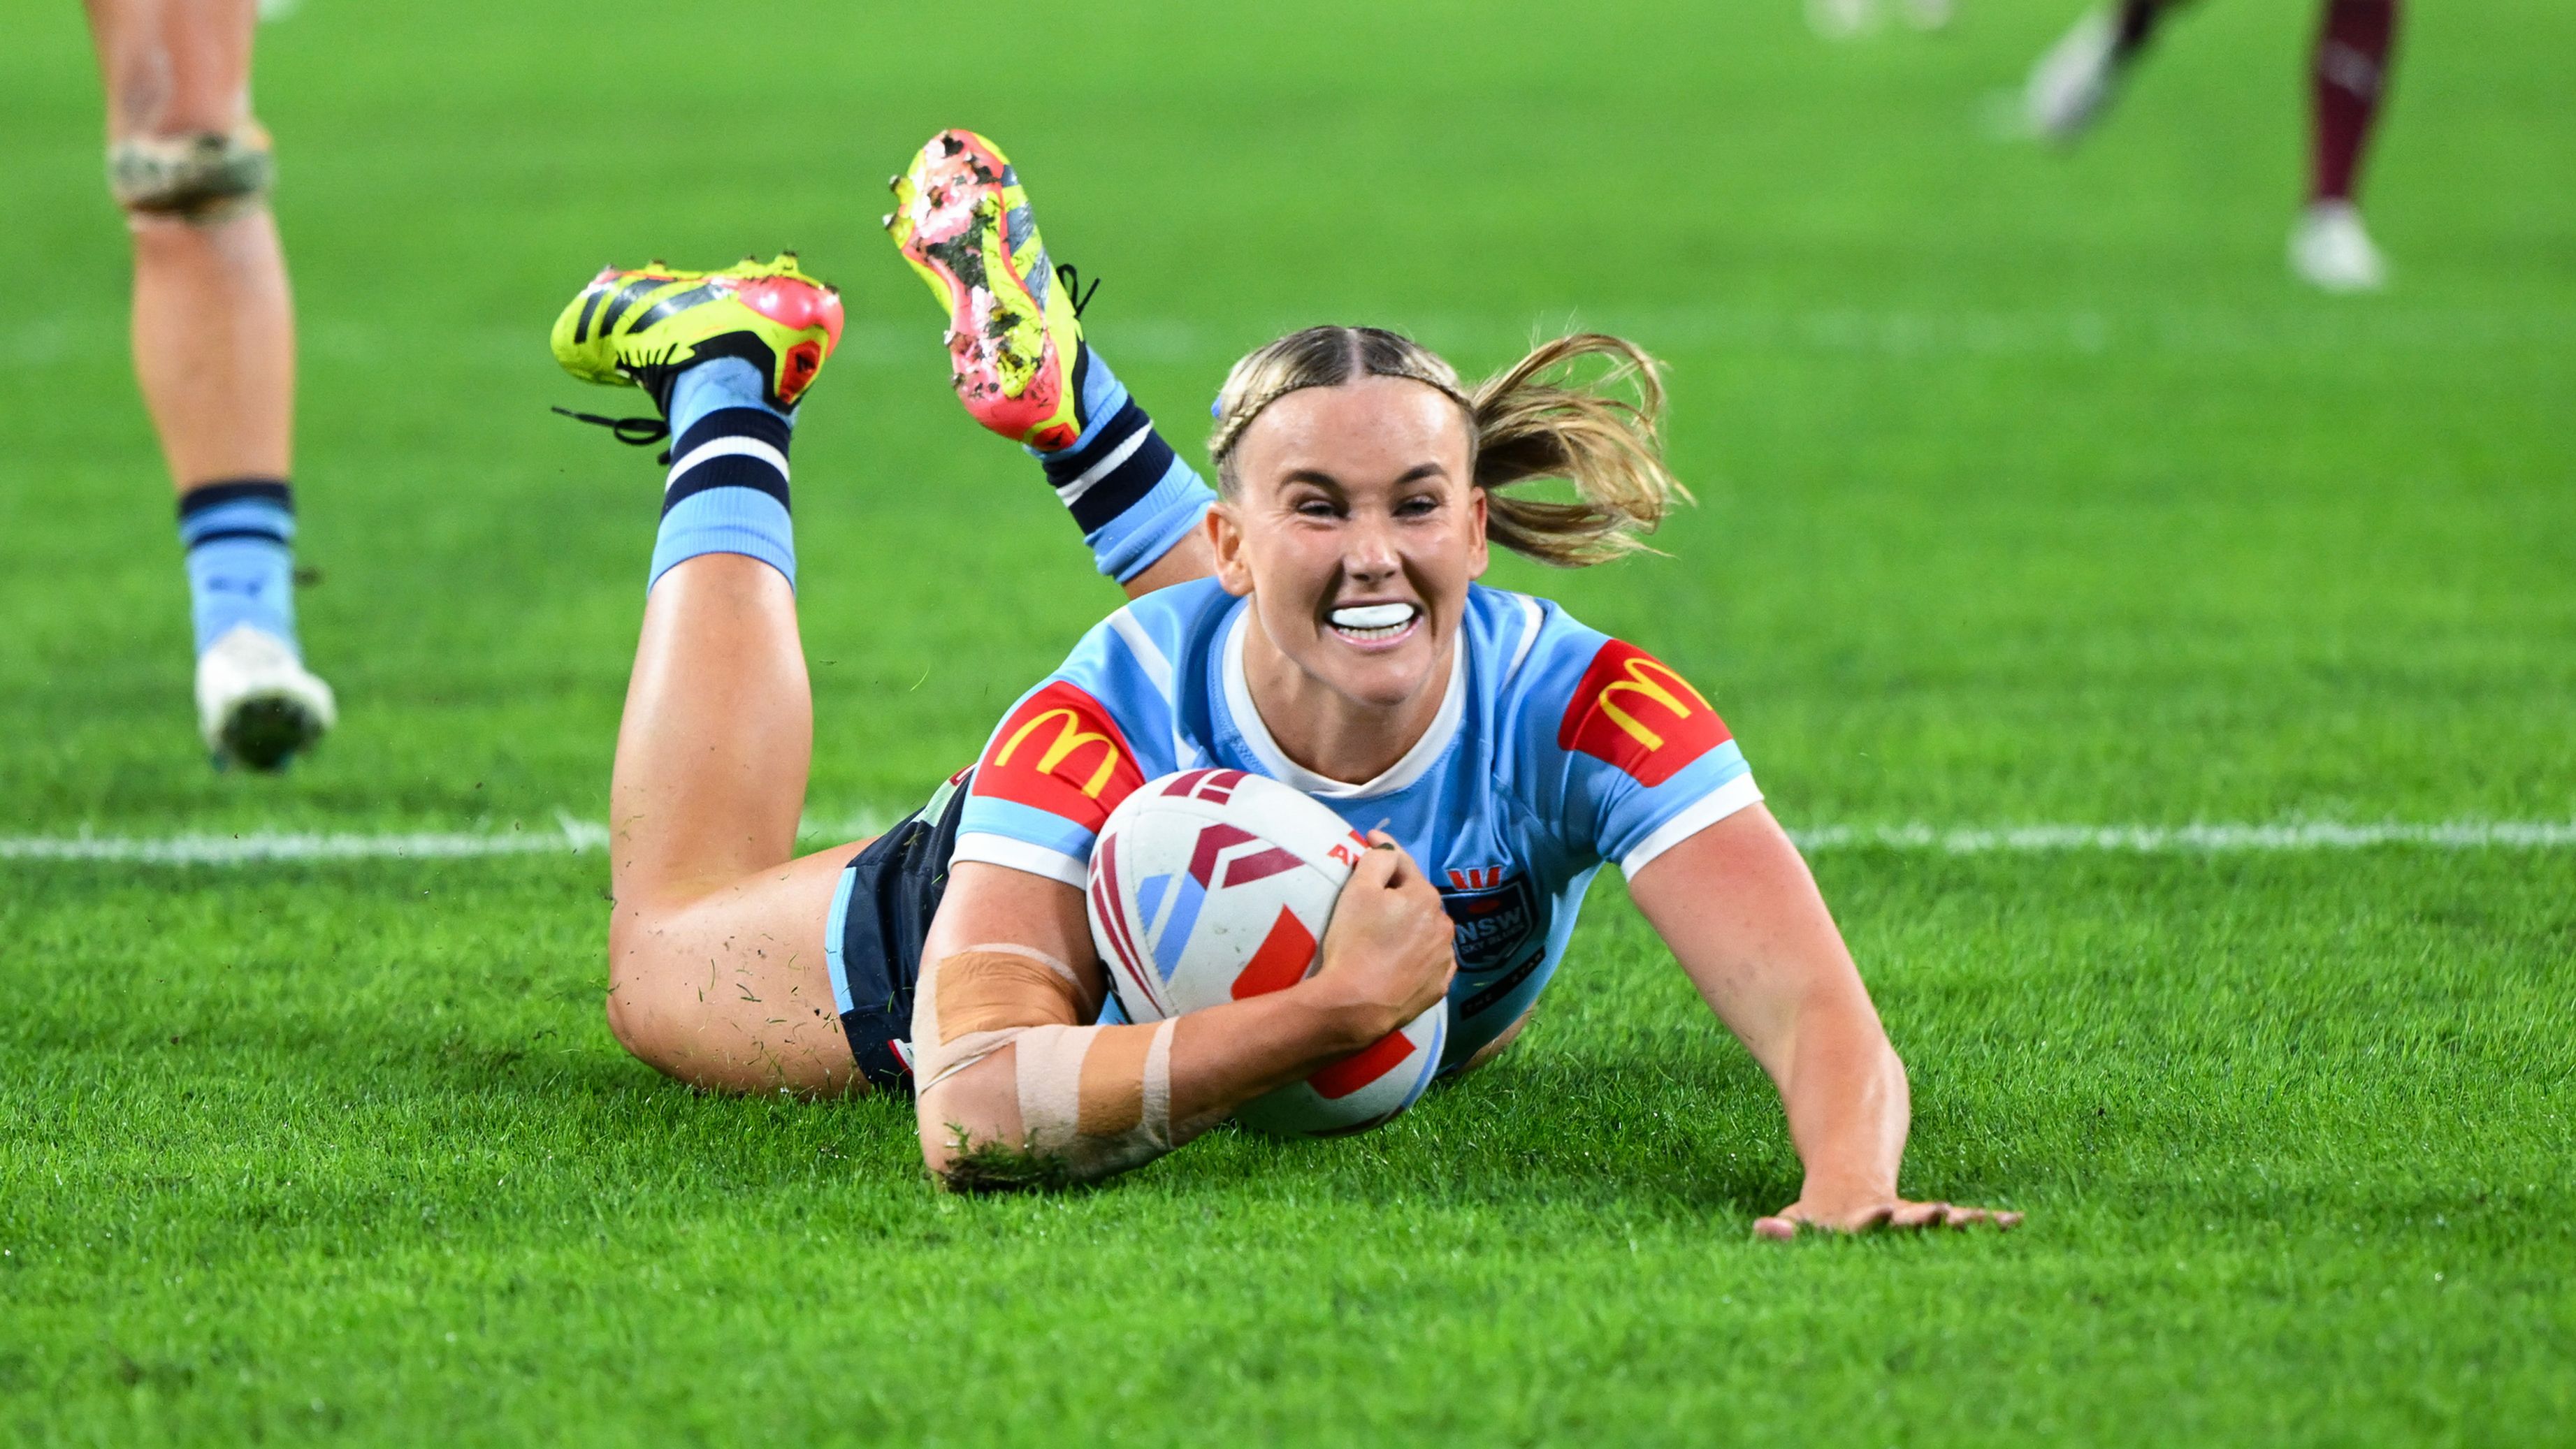 Jaime Chapman ran nearly 80m to score this try for the Sky Blues in the Women&#x27;s State of Origin series opener.